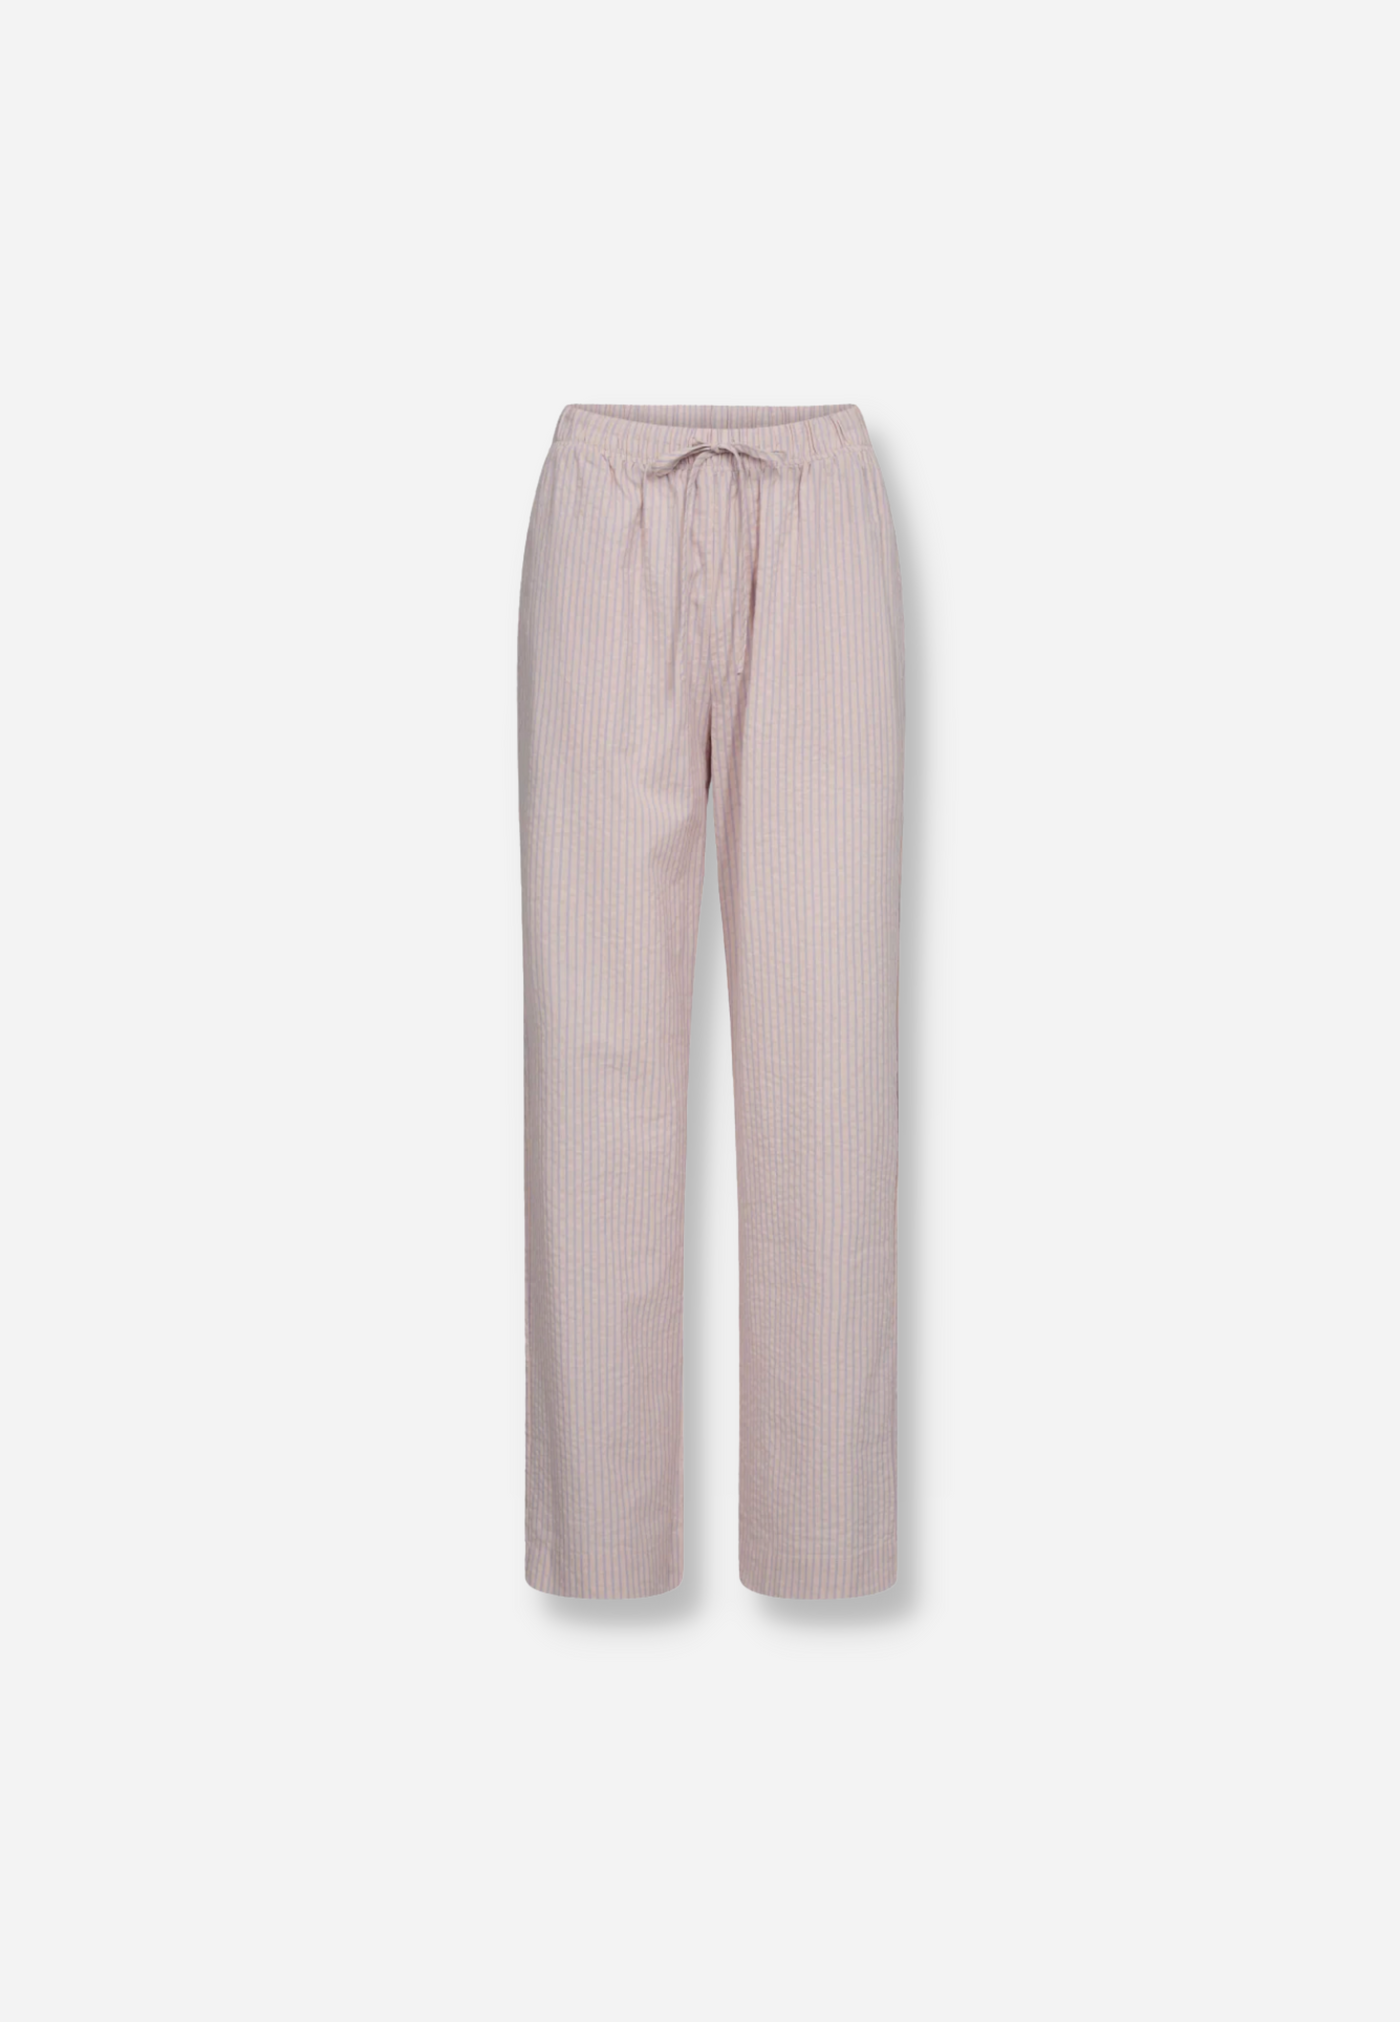 TROUSERS - LAVENDER STRIPED